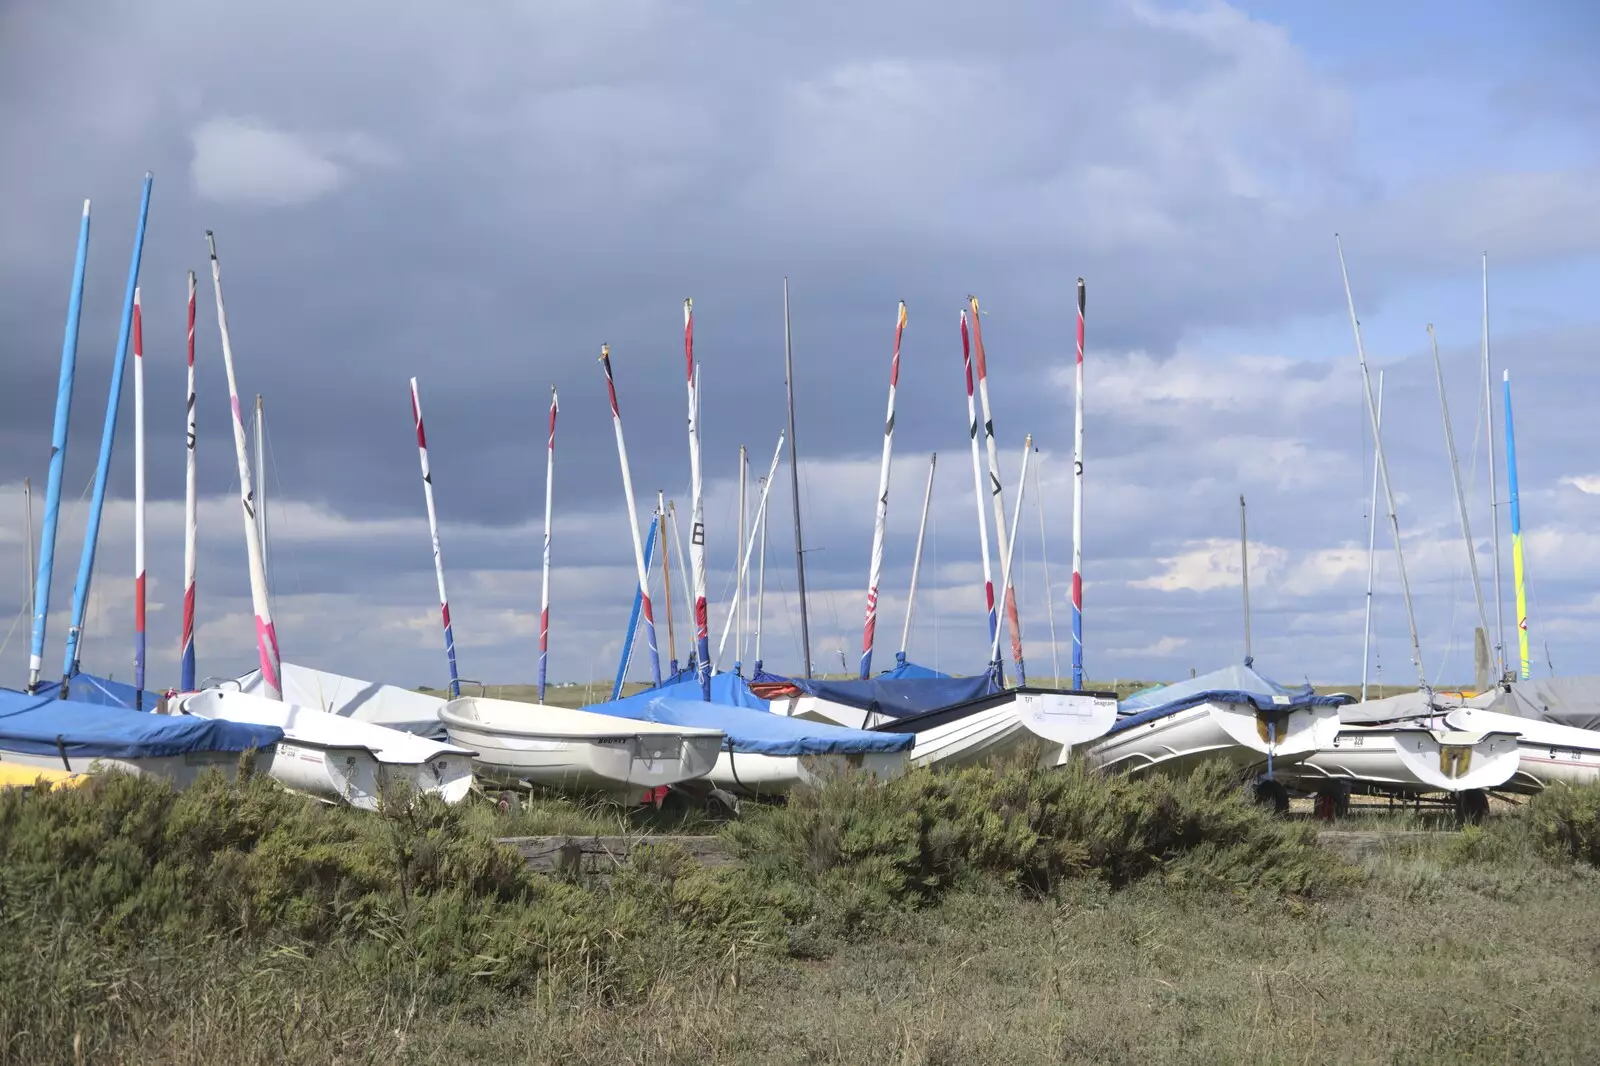 A squadron of Topper dinghies, from Camping on the Edge at Snettisham Beach, Norfolk - 28th August 2023